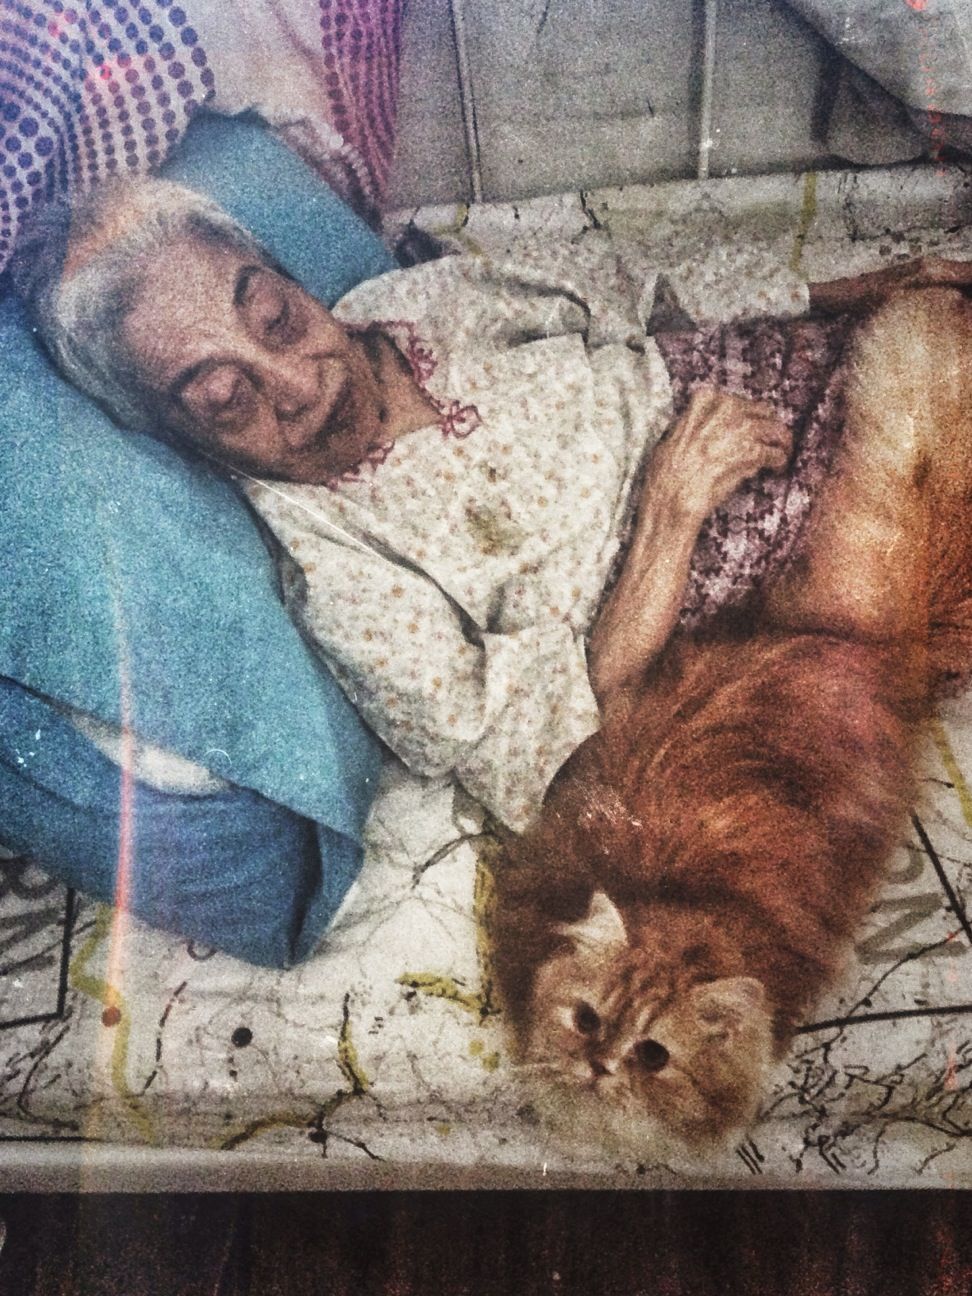 Aji may be the 35th cat in opah's life